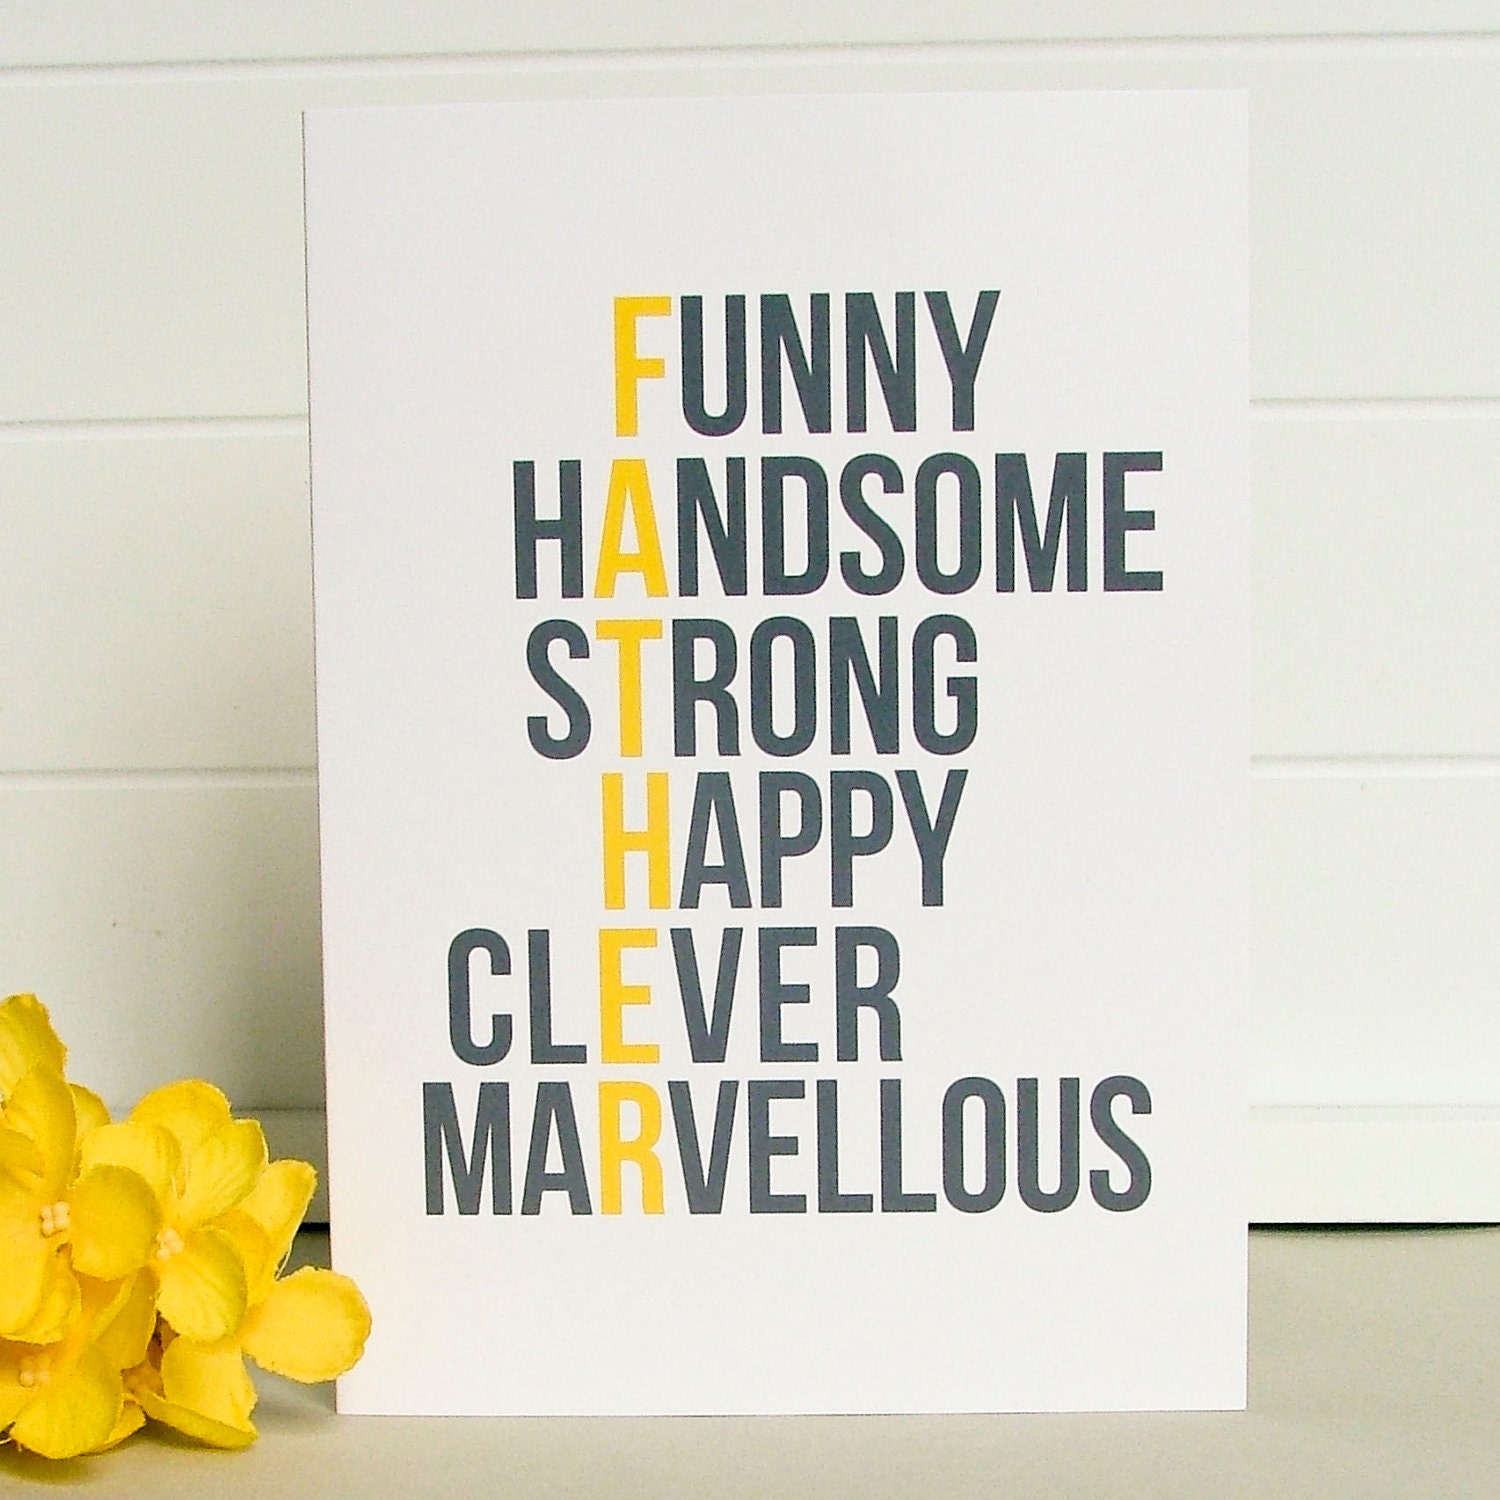 Marvellous Dad - Fathers Day Card